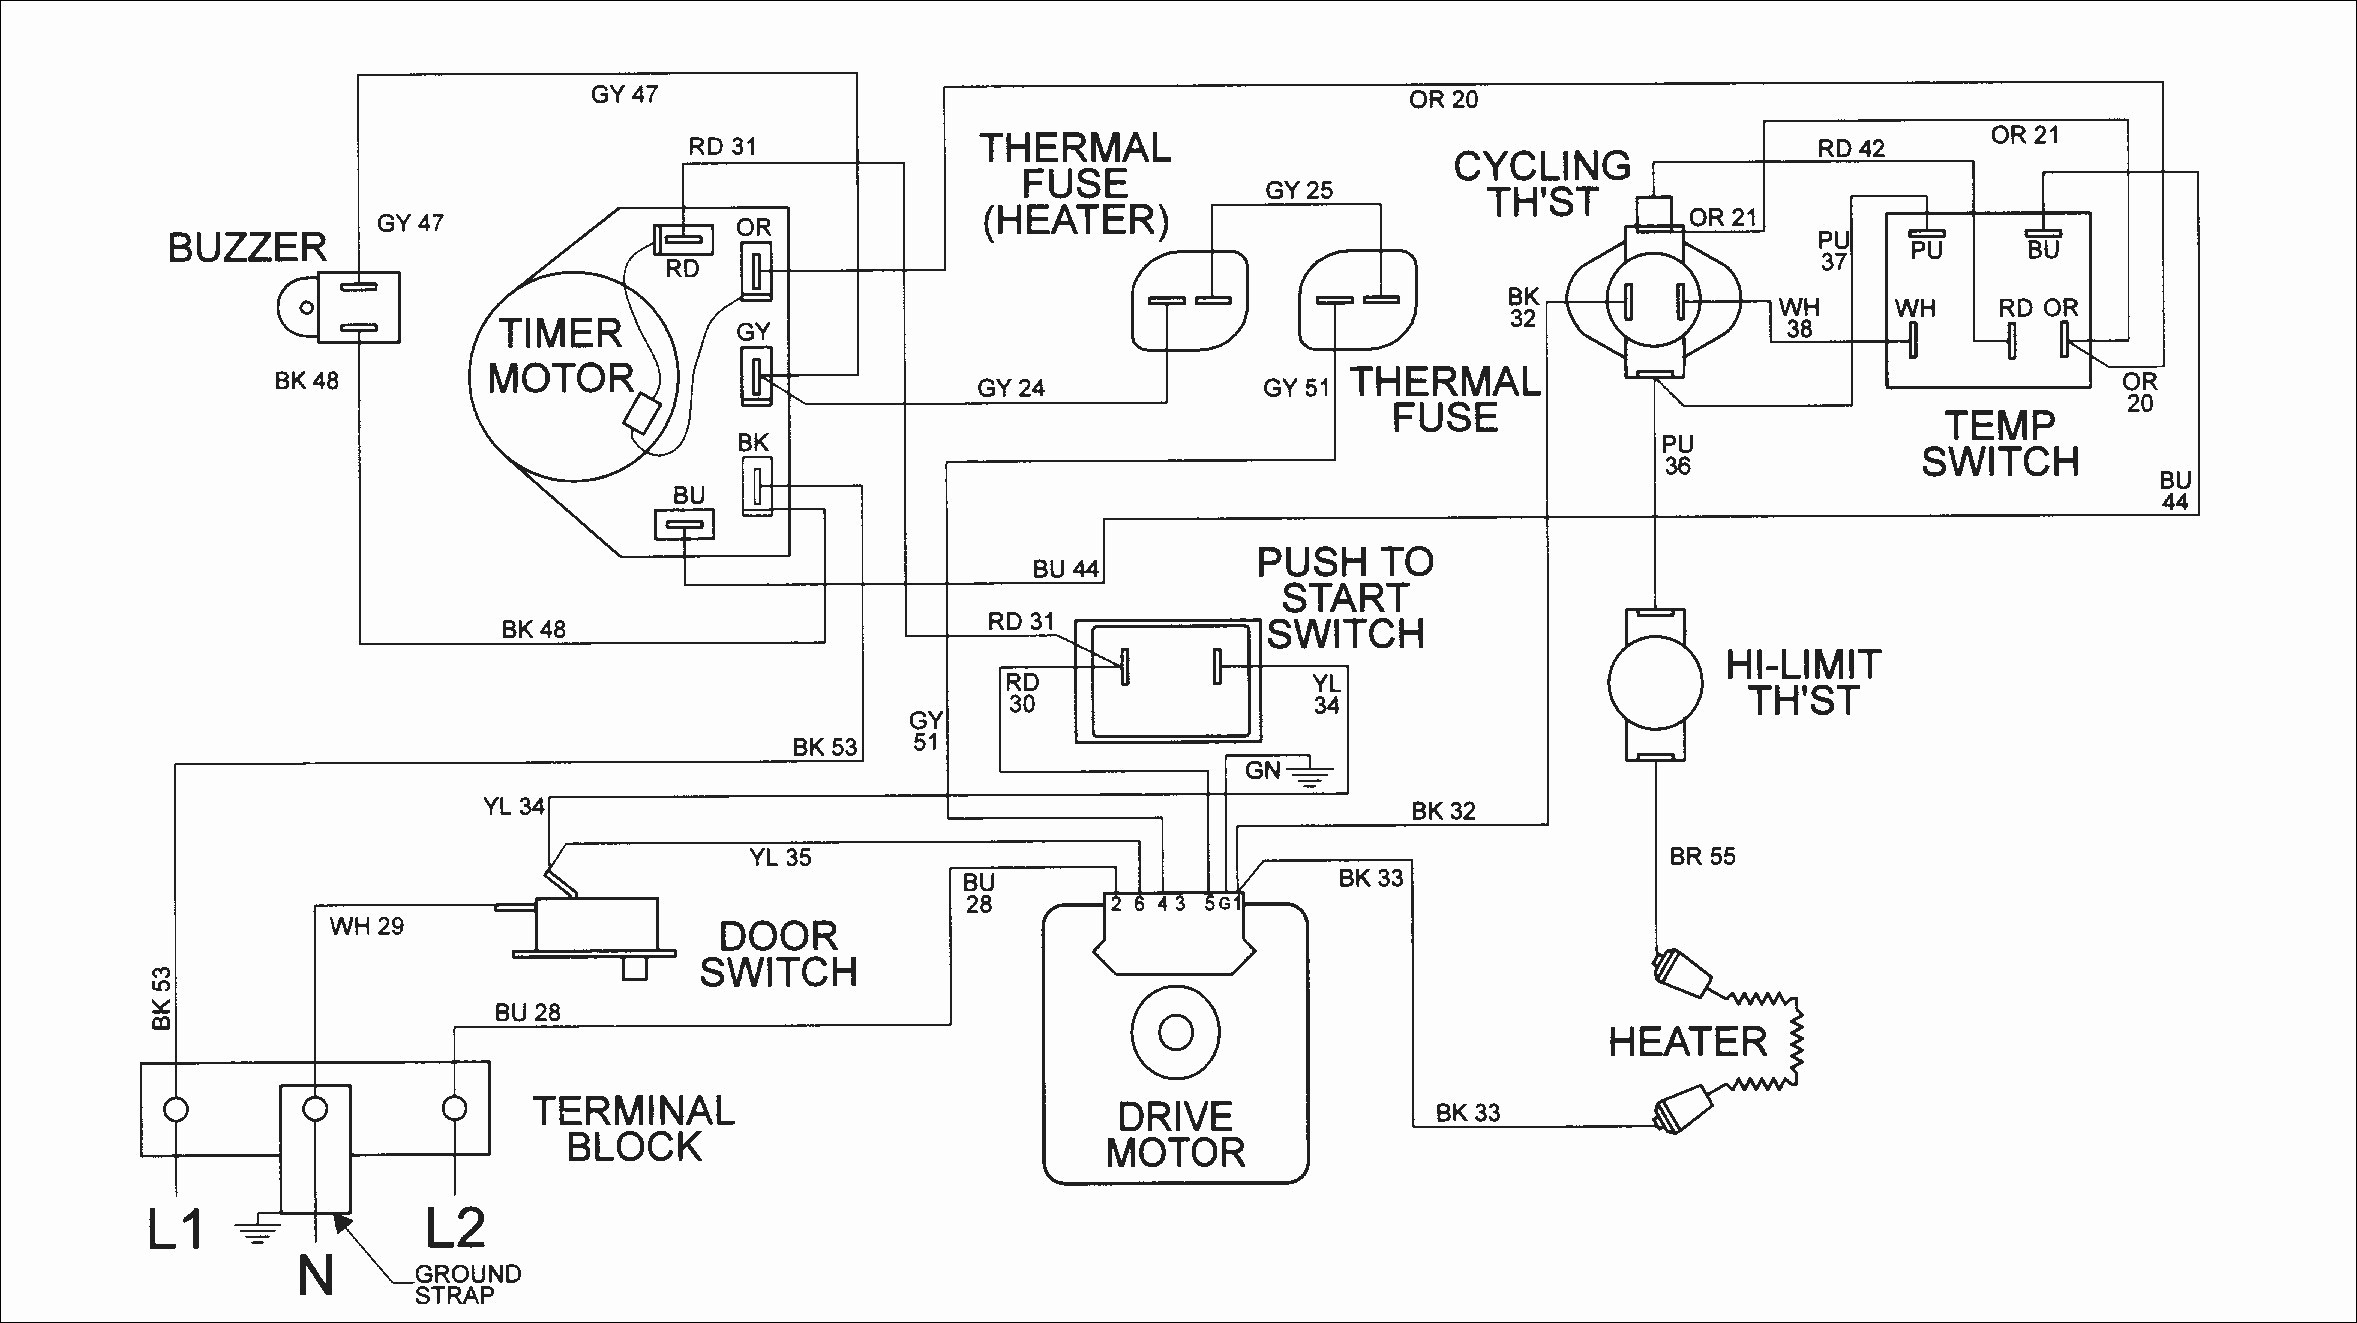 Wiring Diagram for Maytag Dryer New Wiring Diagram Maytag Dryer Of Wiring Diagram for Maytag Dryer